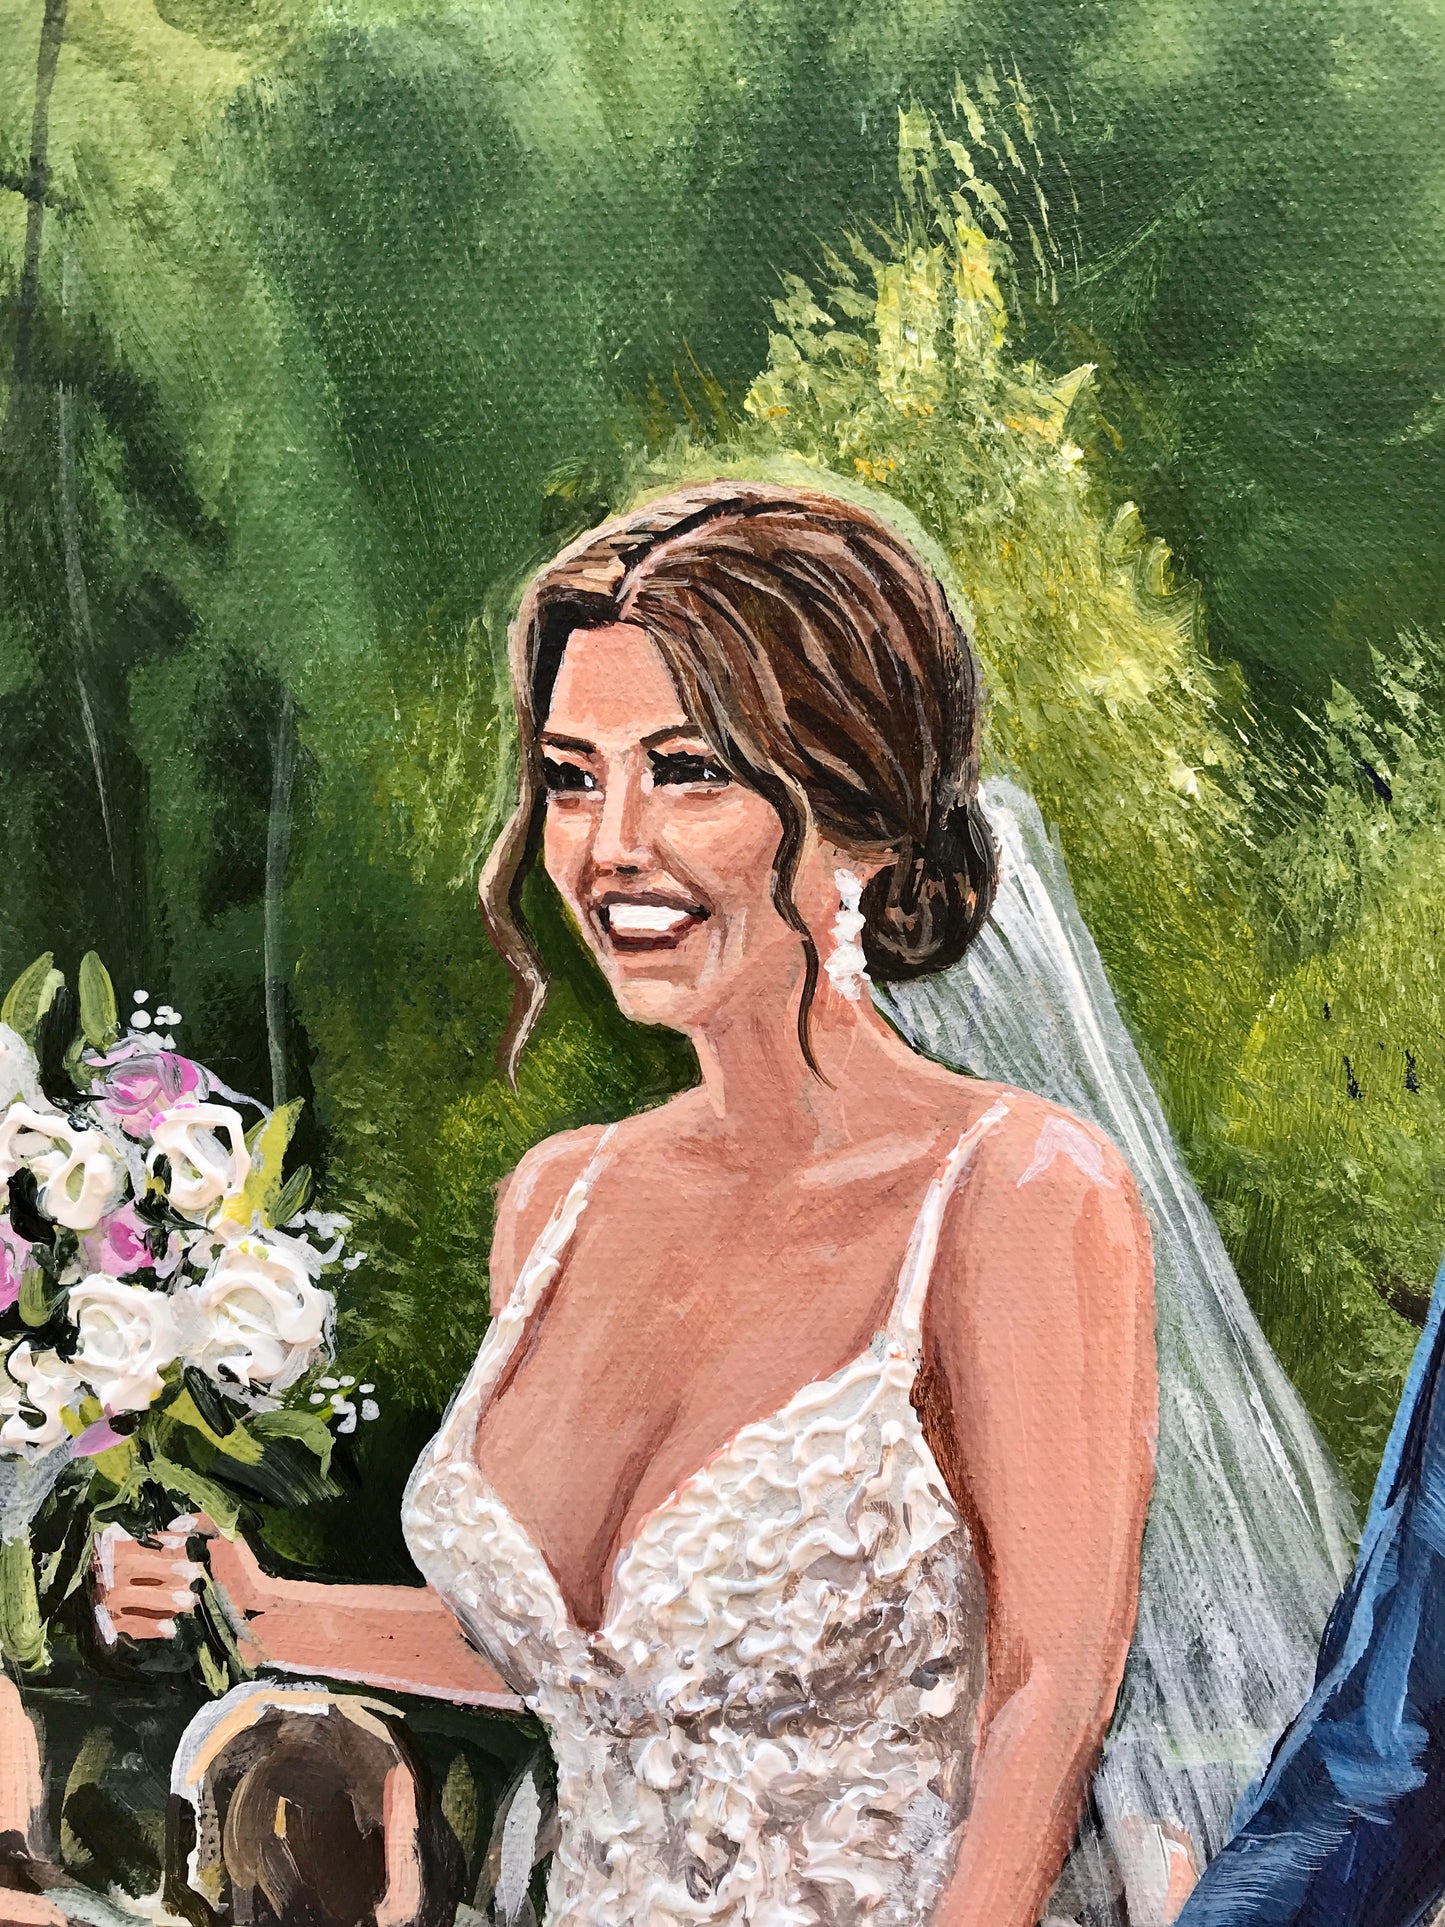 Live Wedding Painting Inside A Cave 2022